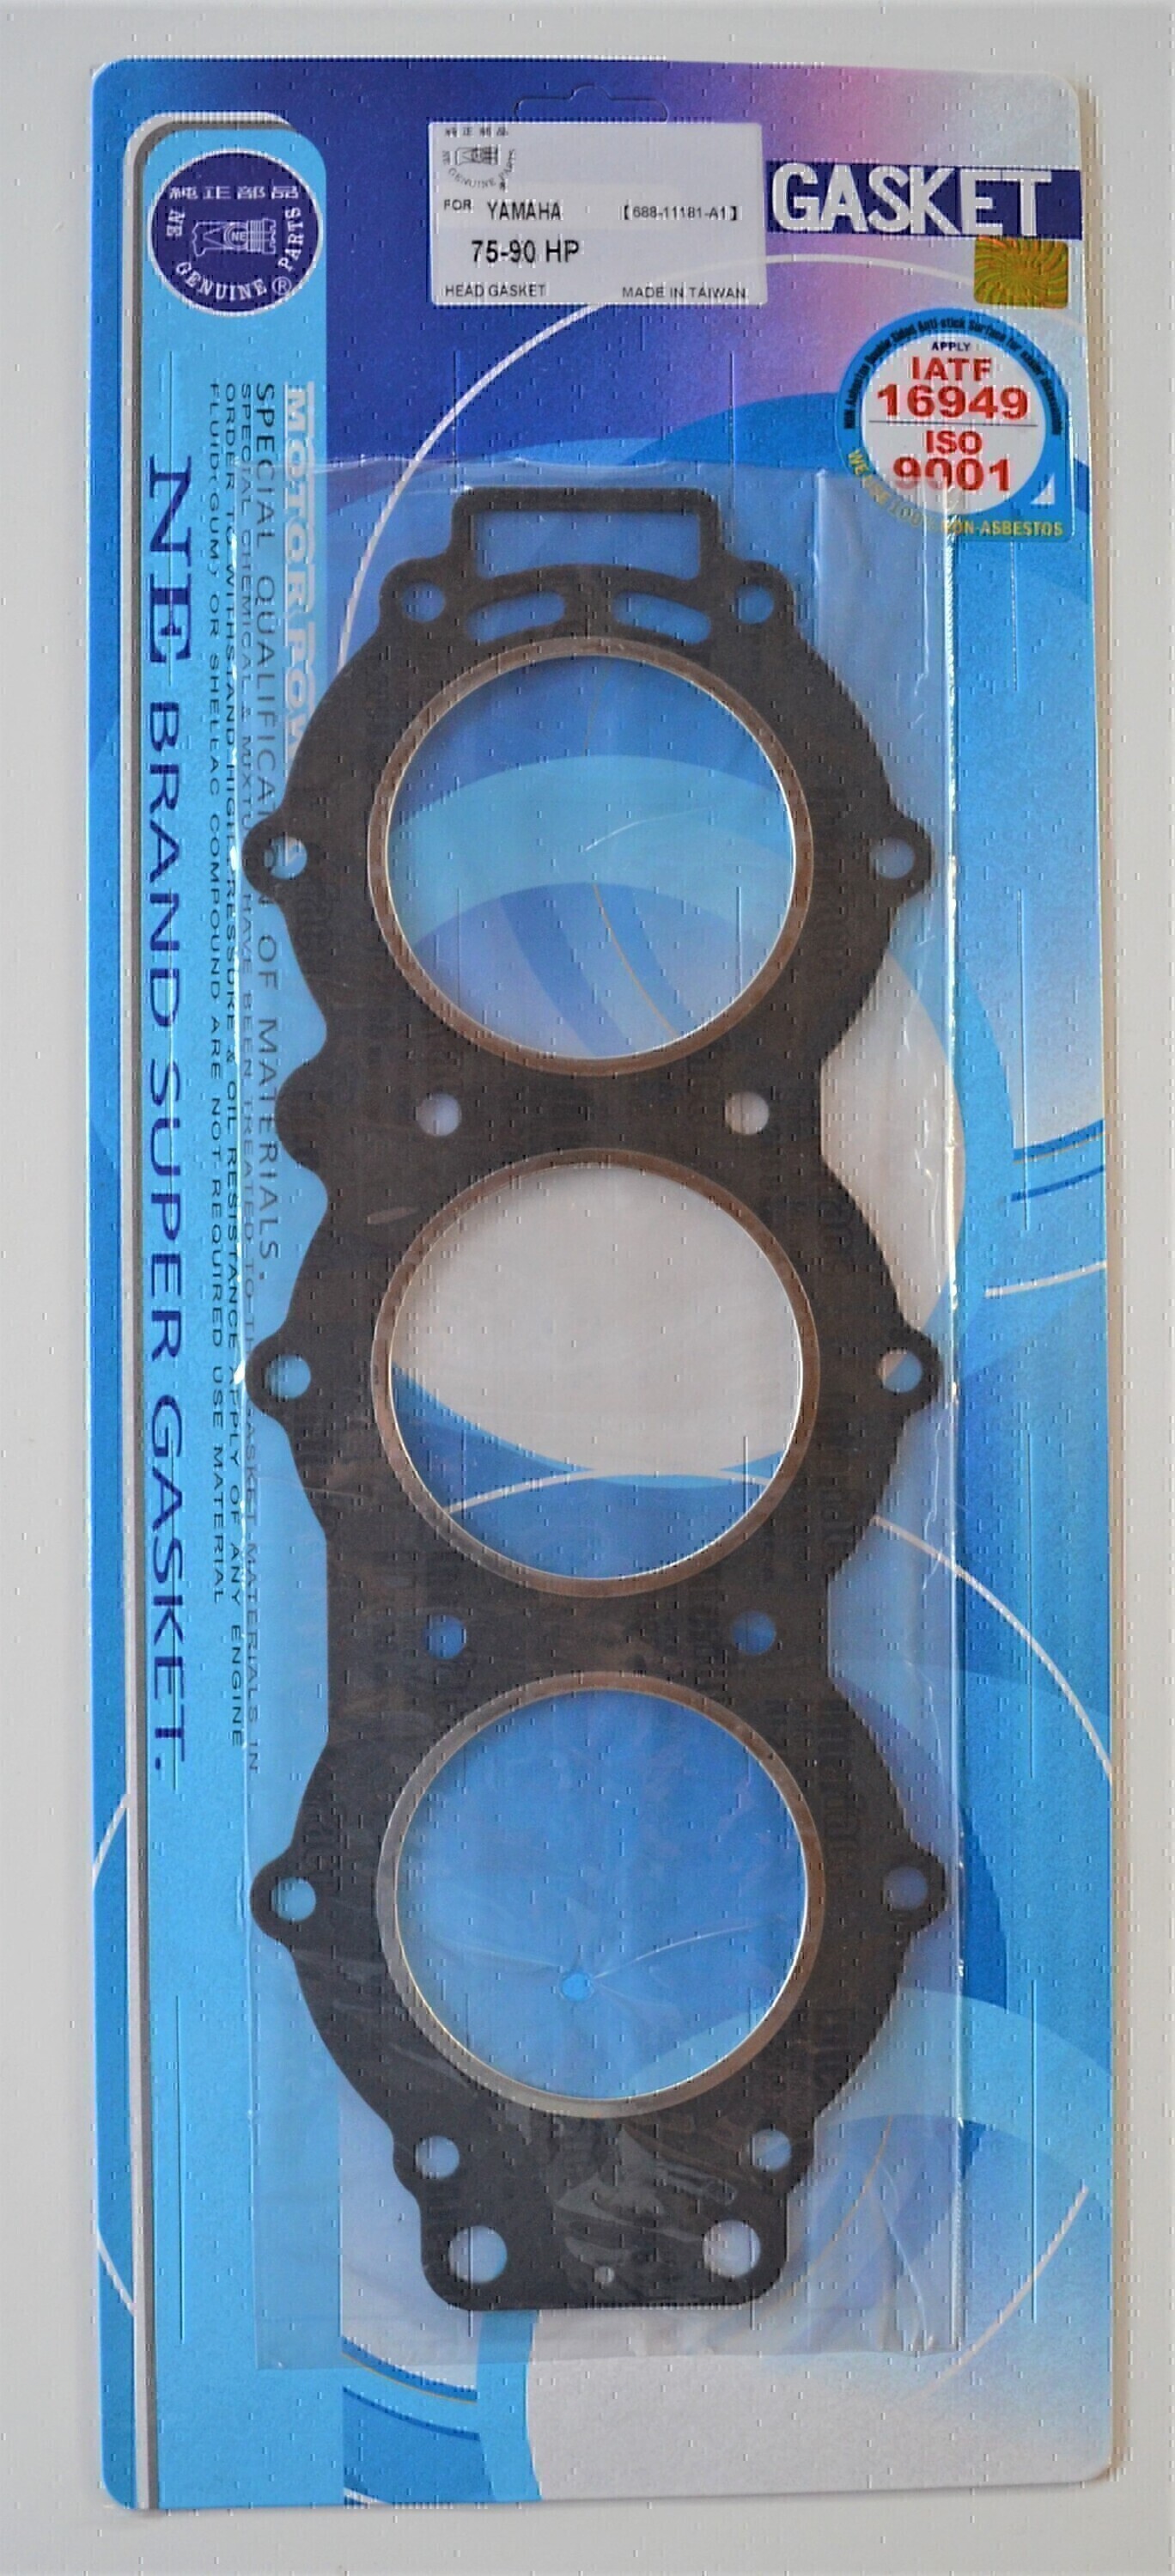 HEAD GASKET FOR YAMAHA 75HP 80HP 85HP 90HP OUTBOARD MOTOR # 688-11181-A1